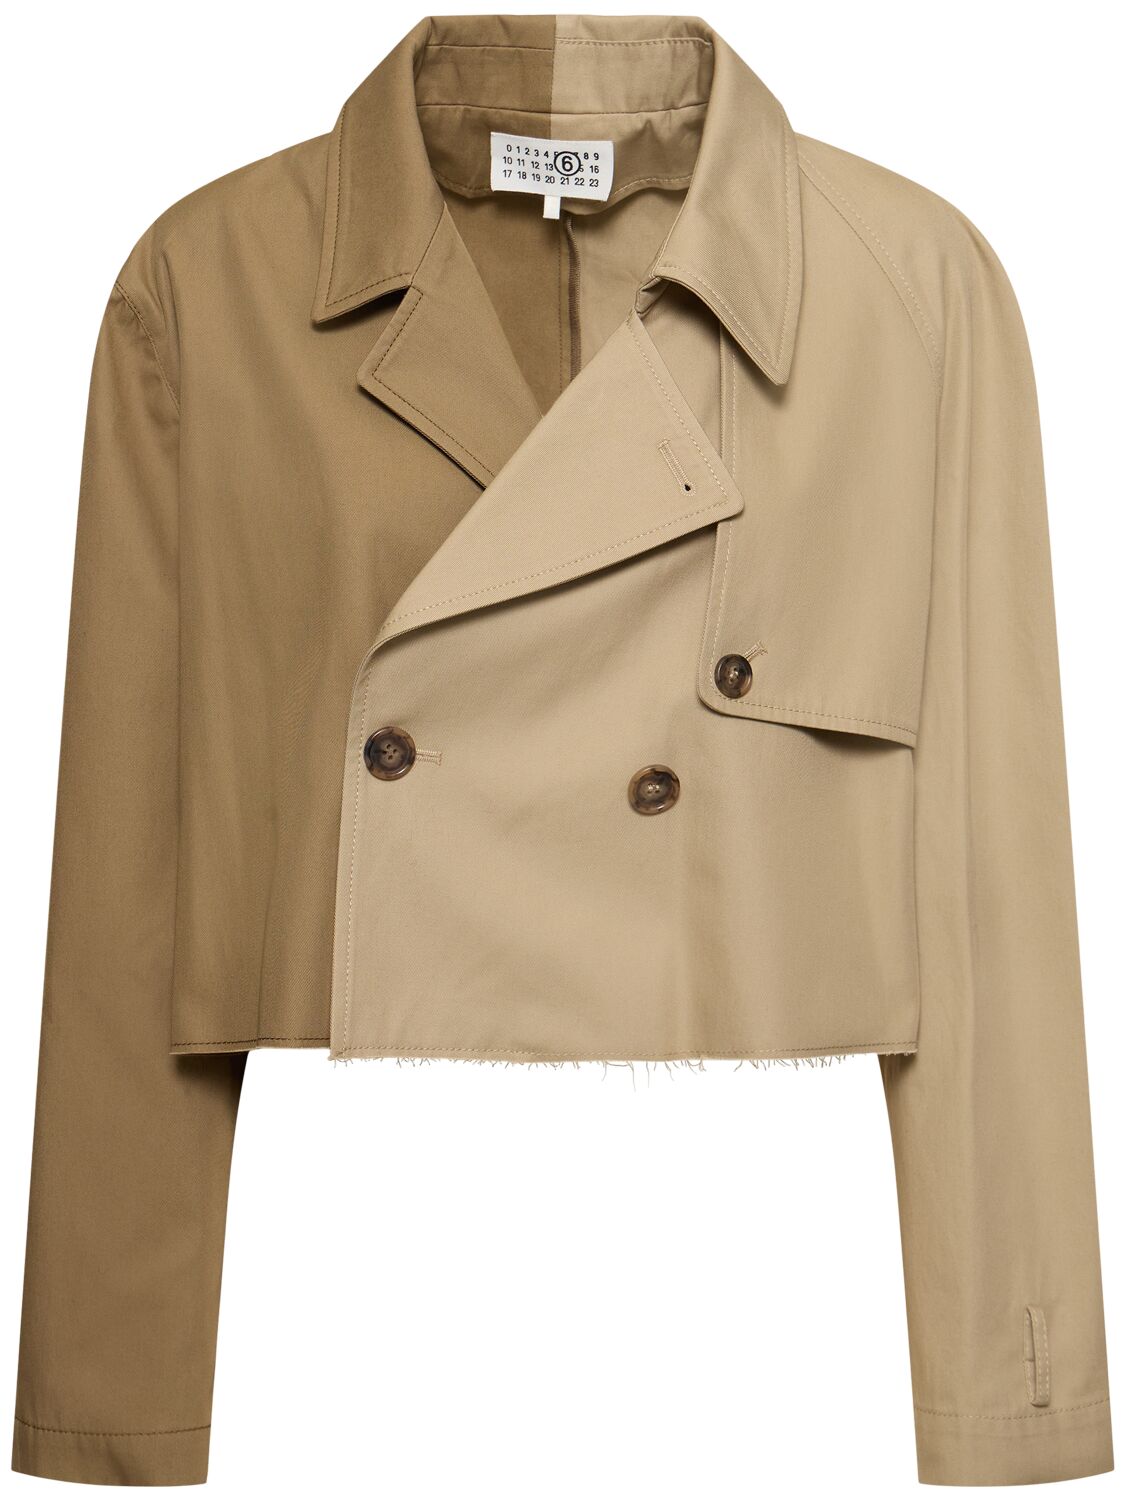 Mm6 Maison Margiela Oversized Two-tone Sports Jacket In Mud Brown/sand Be